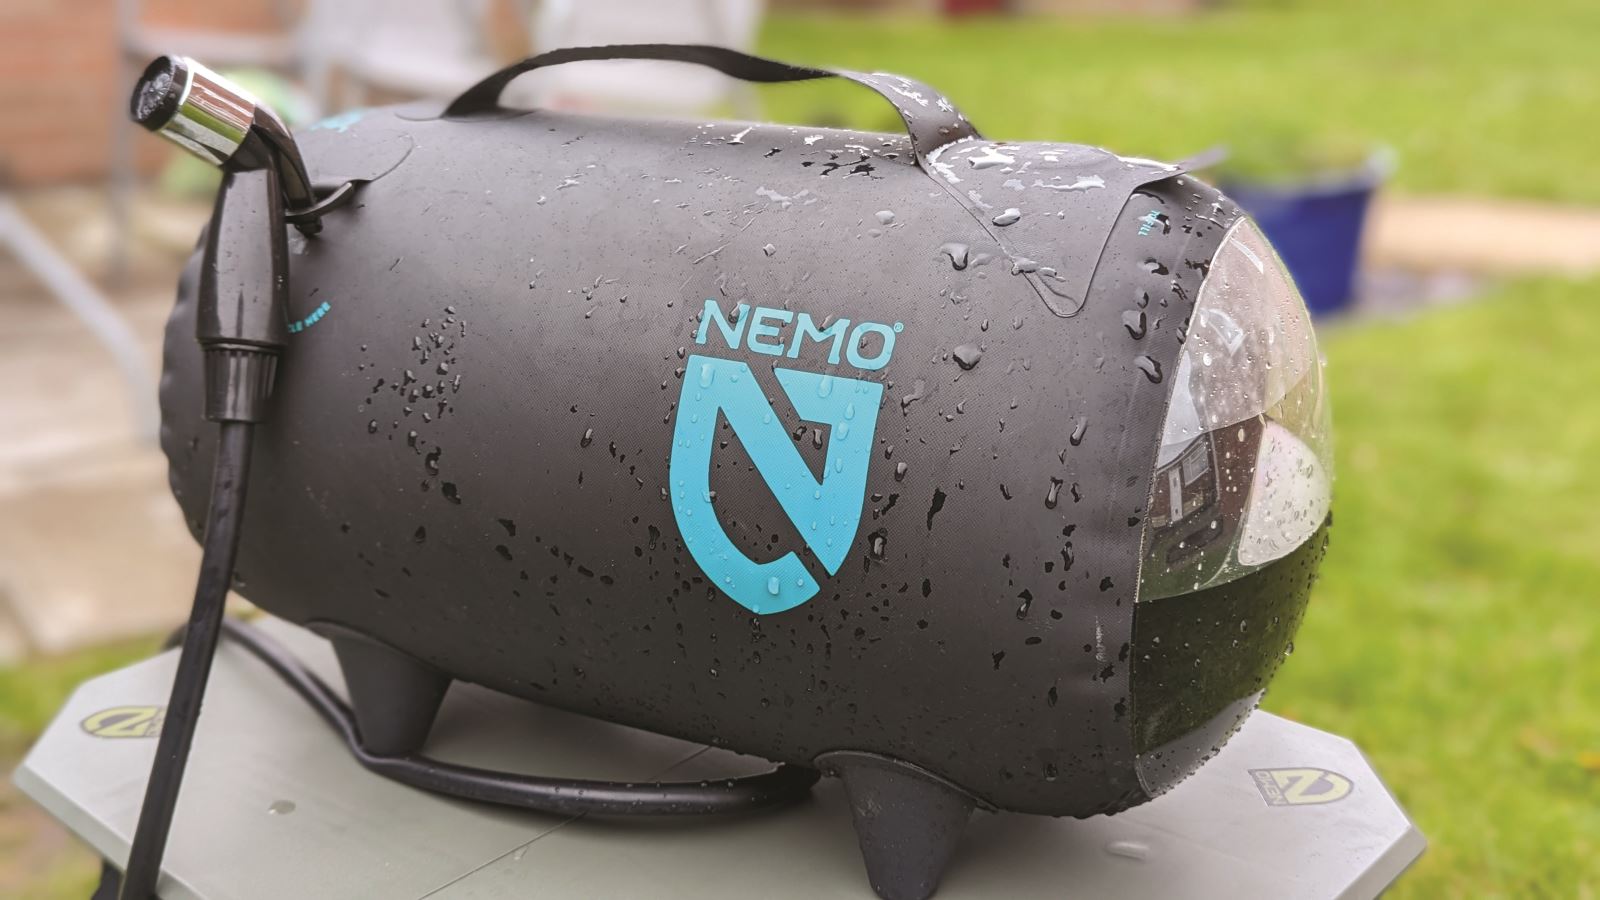 Portable outdoor shower from Nemo